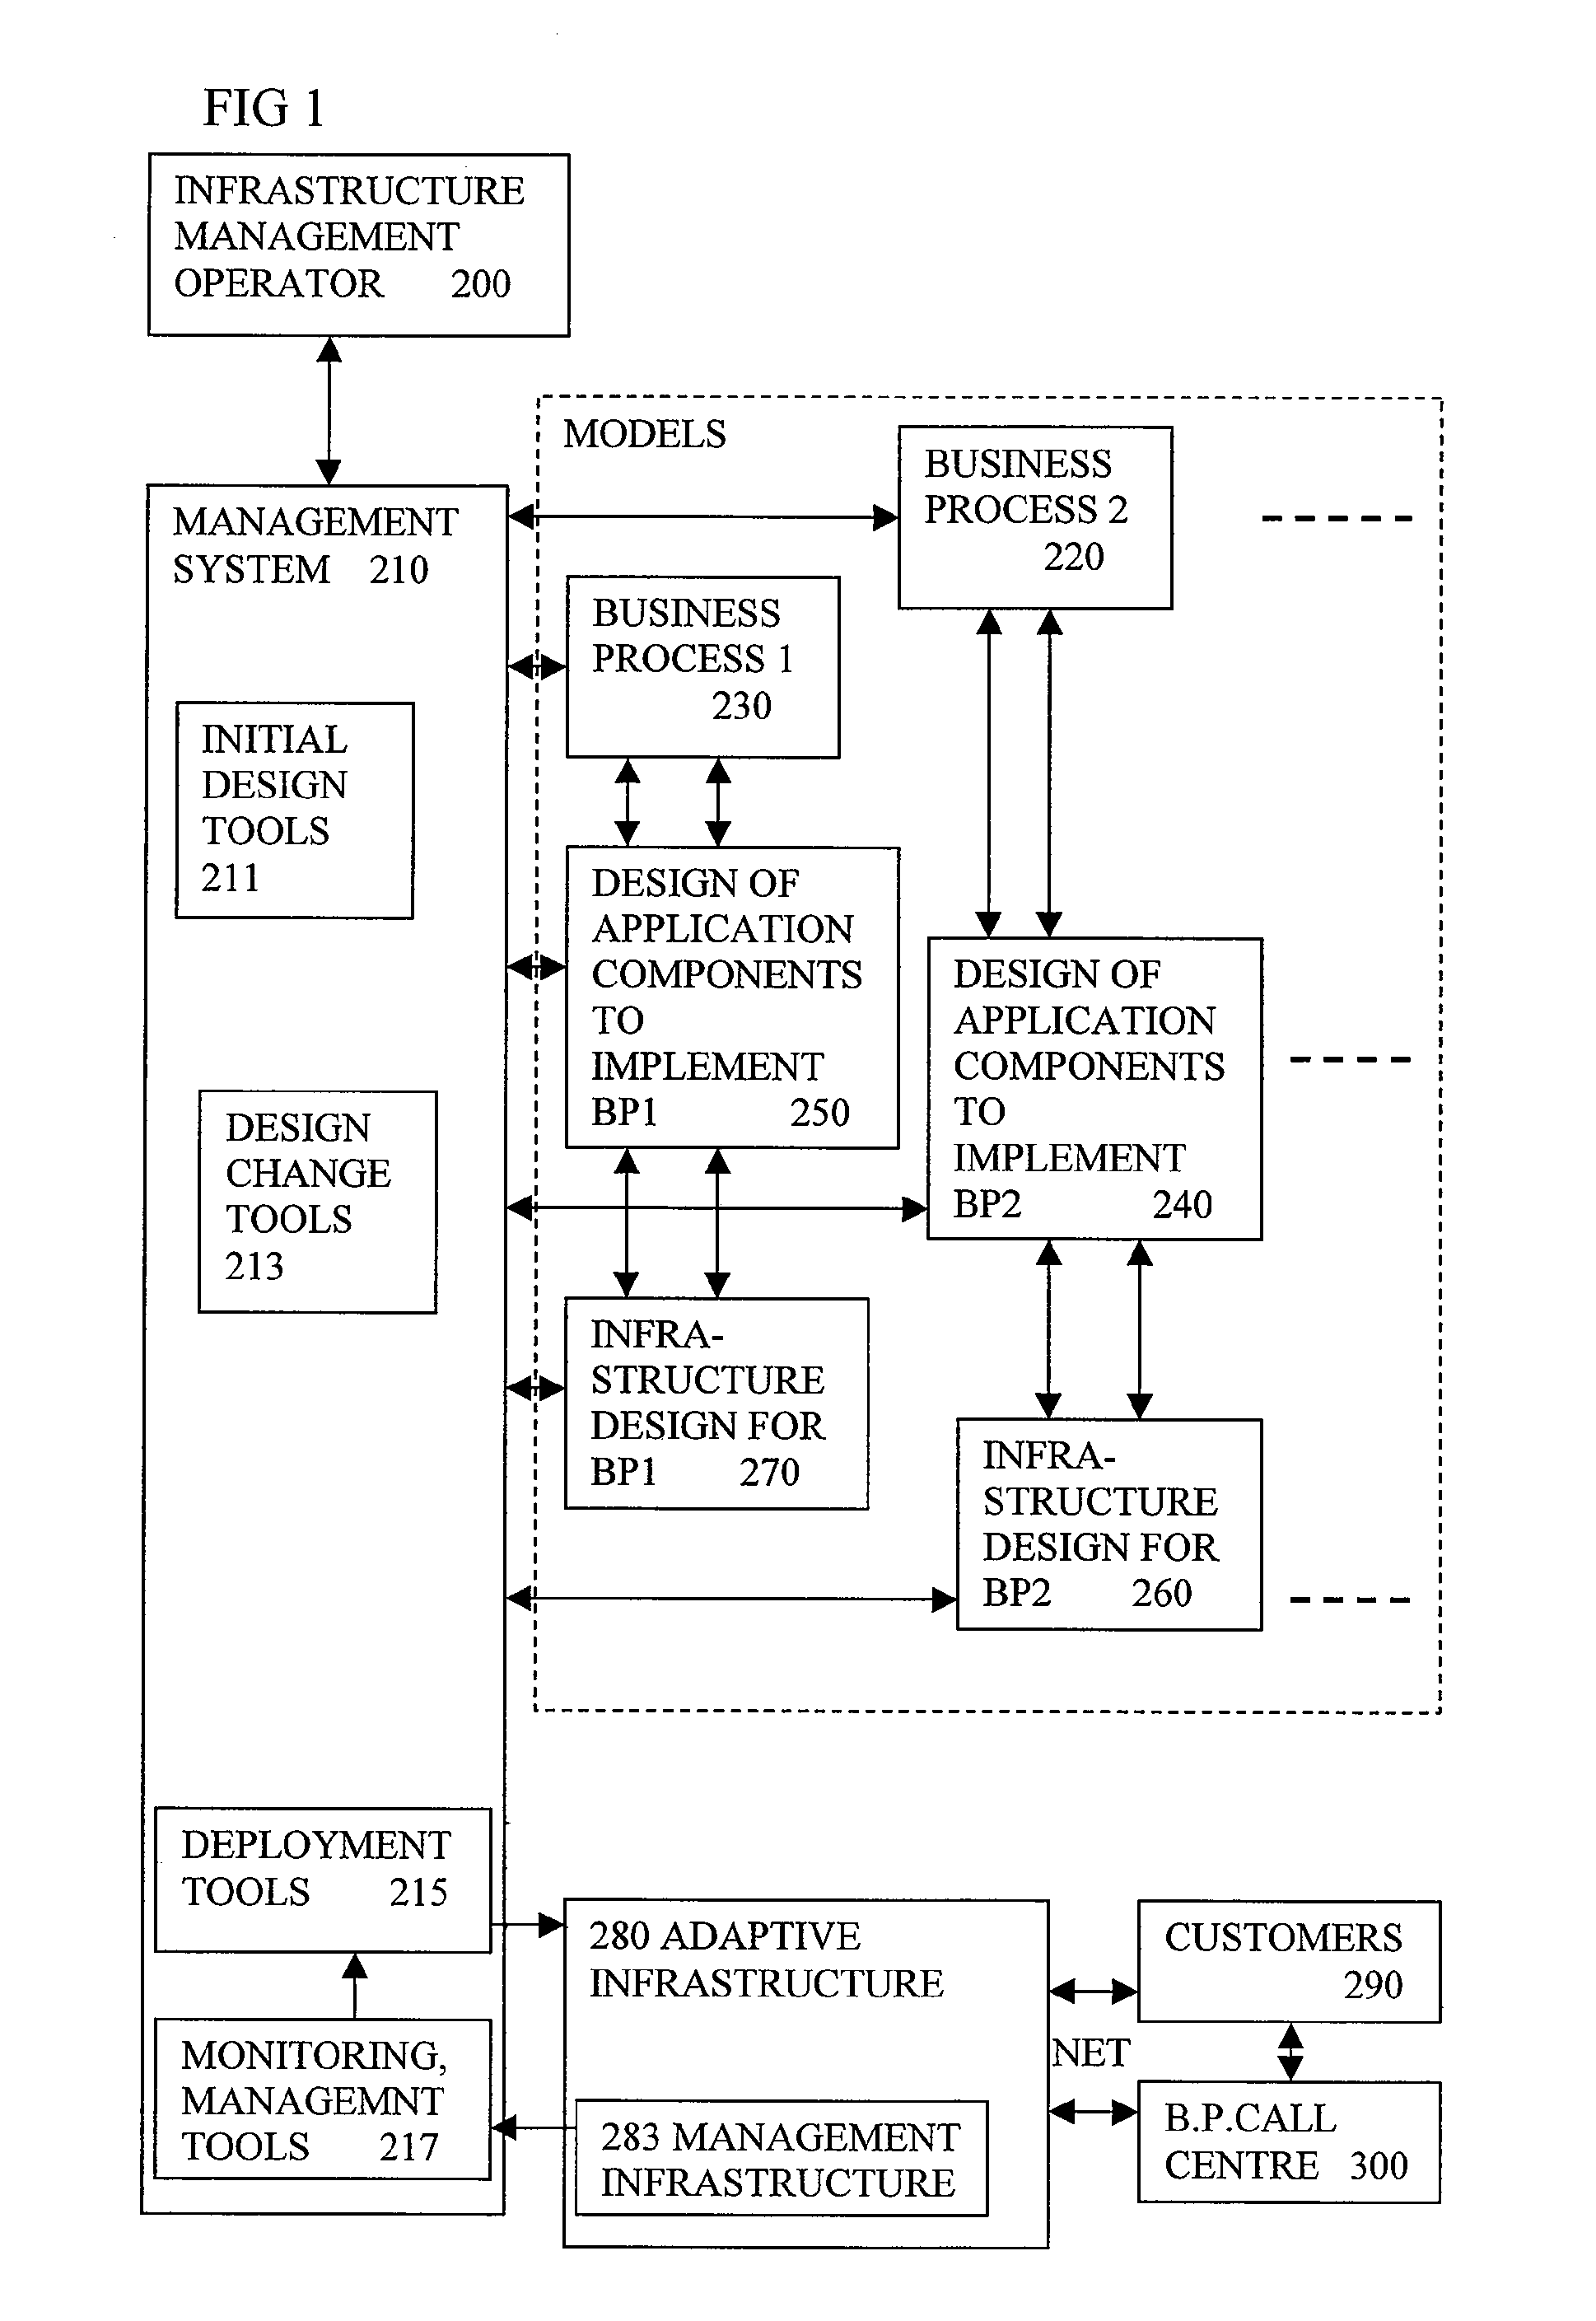 Modelling Computer Based Business Process And Simulating Operation